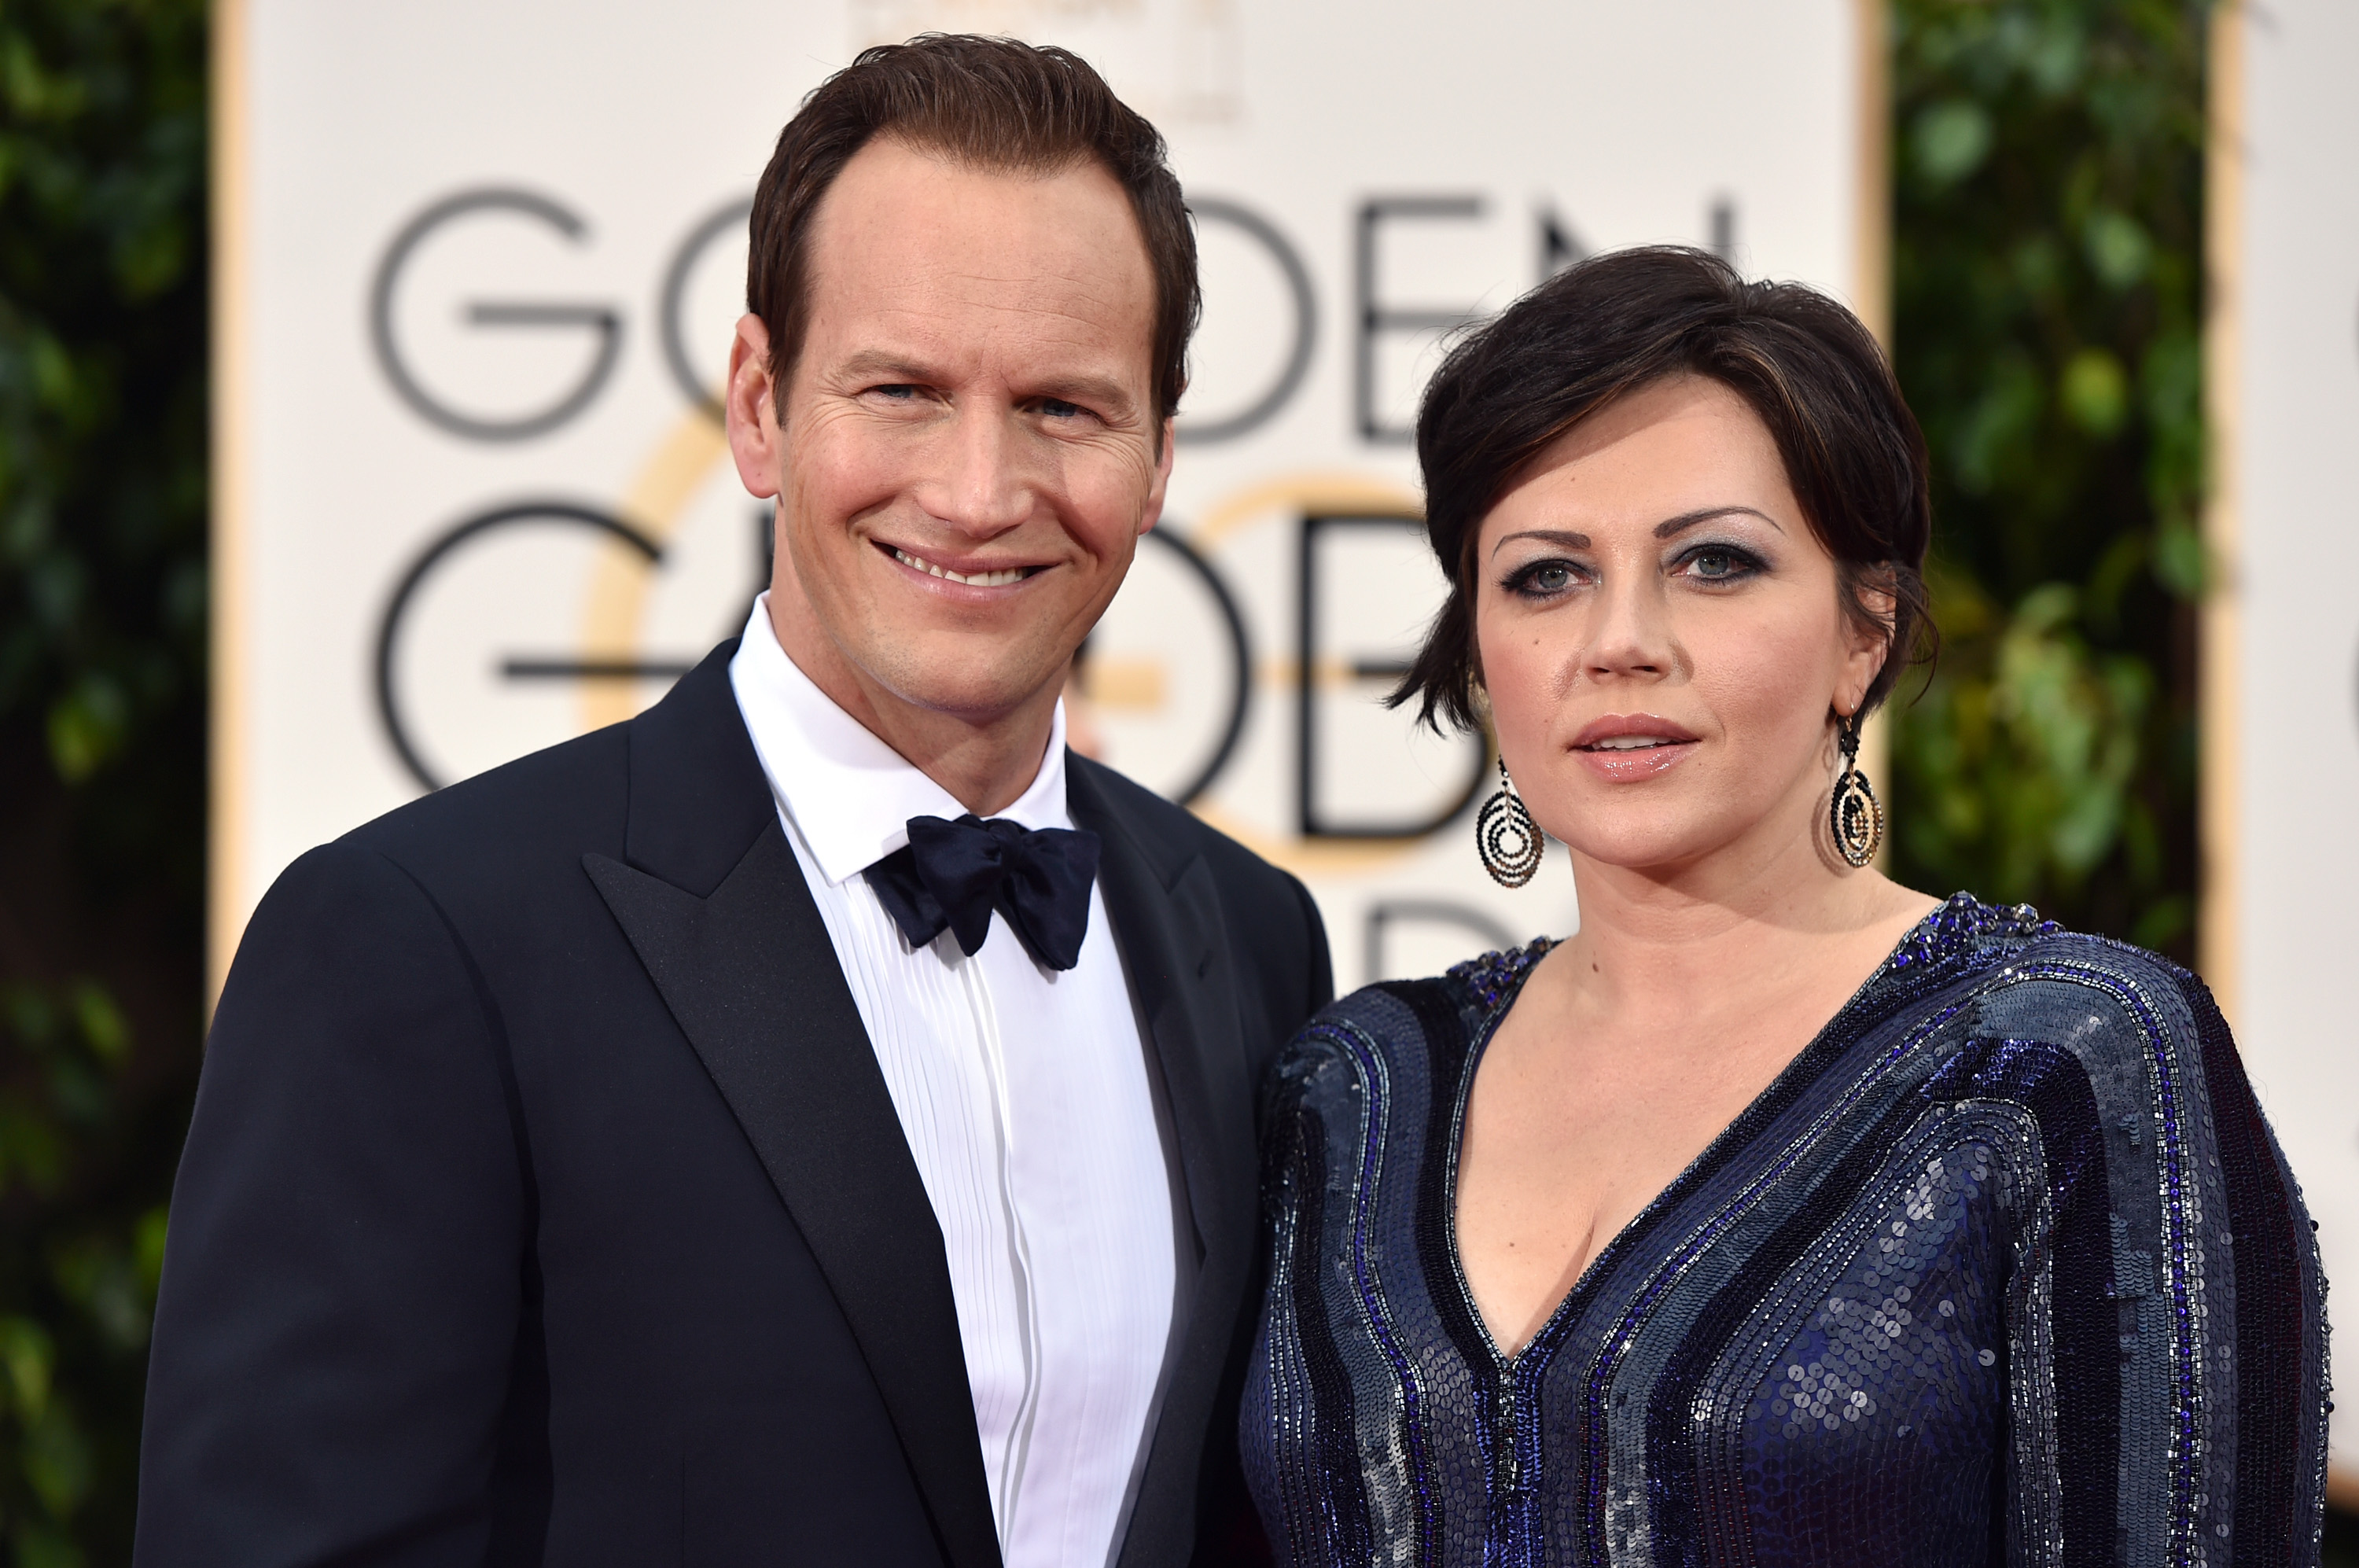 Patrick Wilson and Dagmara Dominczyk attend the 73rd Annual Golden Globe Awards at the Beverly Hilton Hotel on January 10, 2016 in Beverly Hills, California | Source: Getty Images